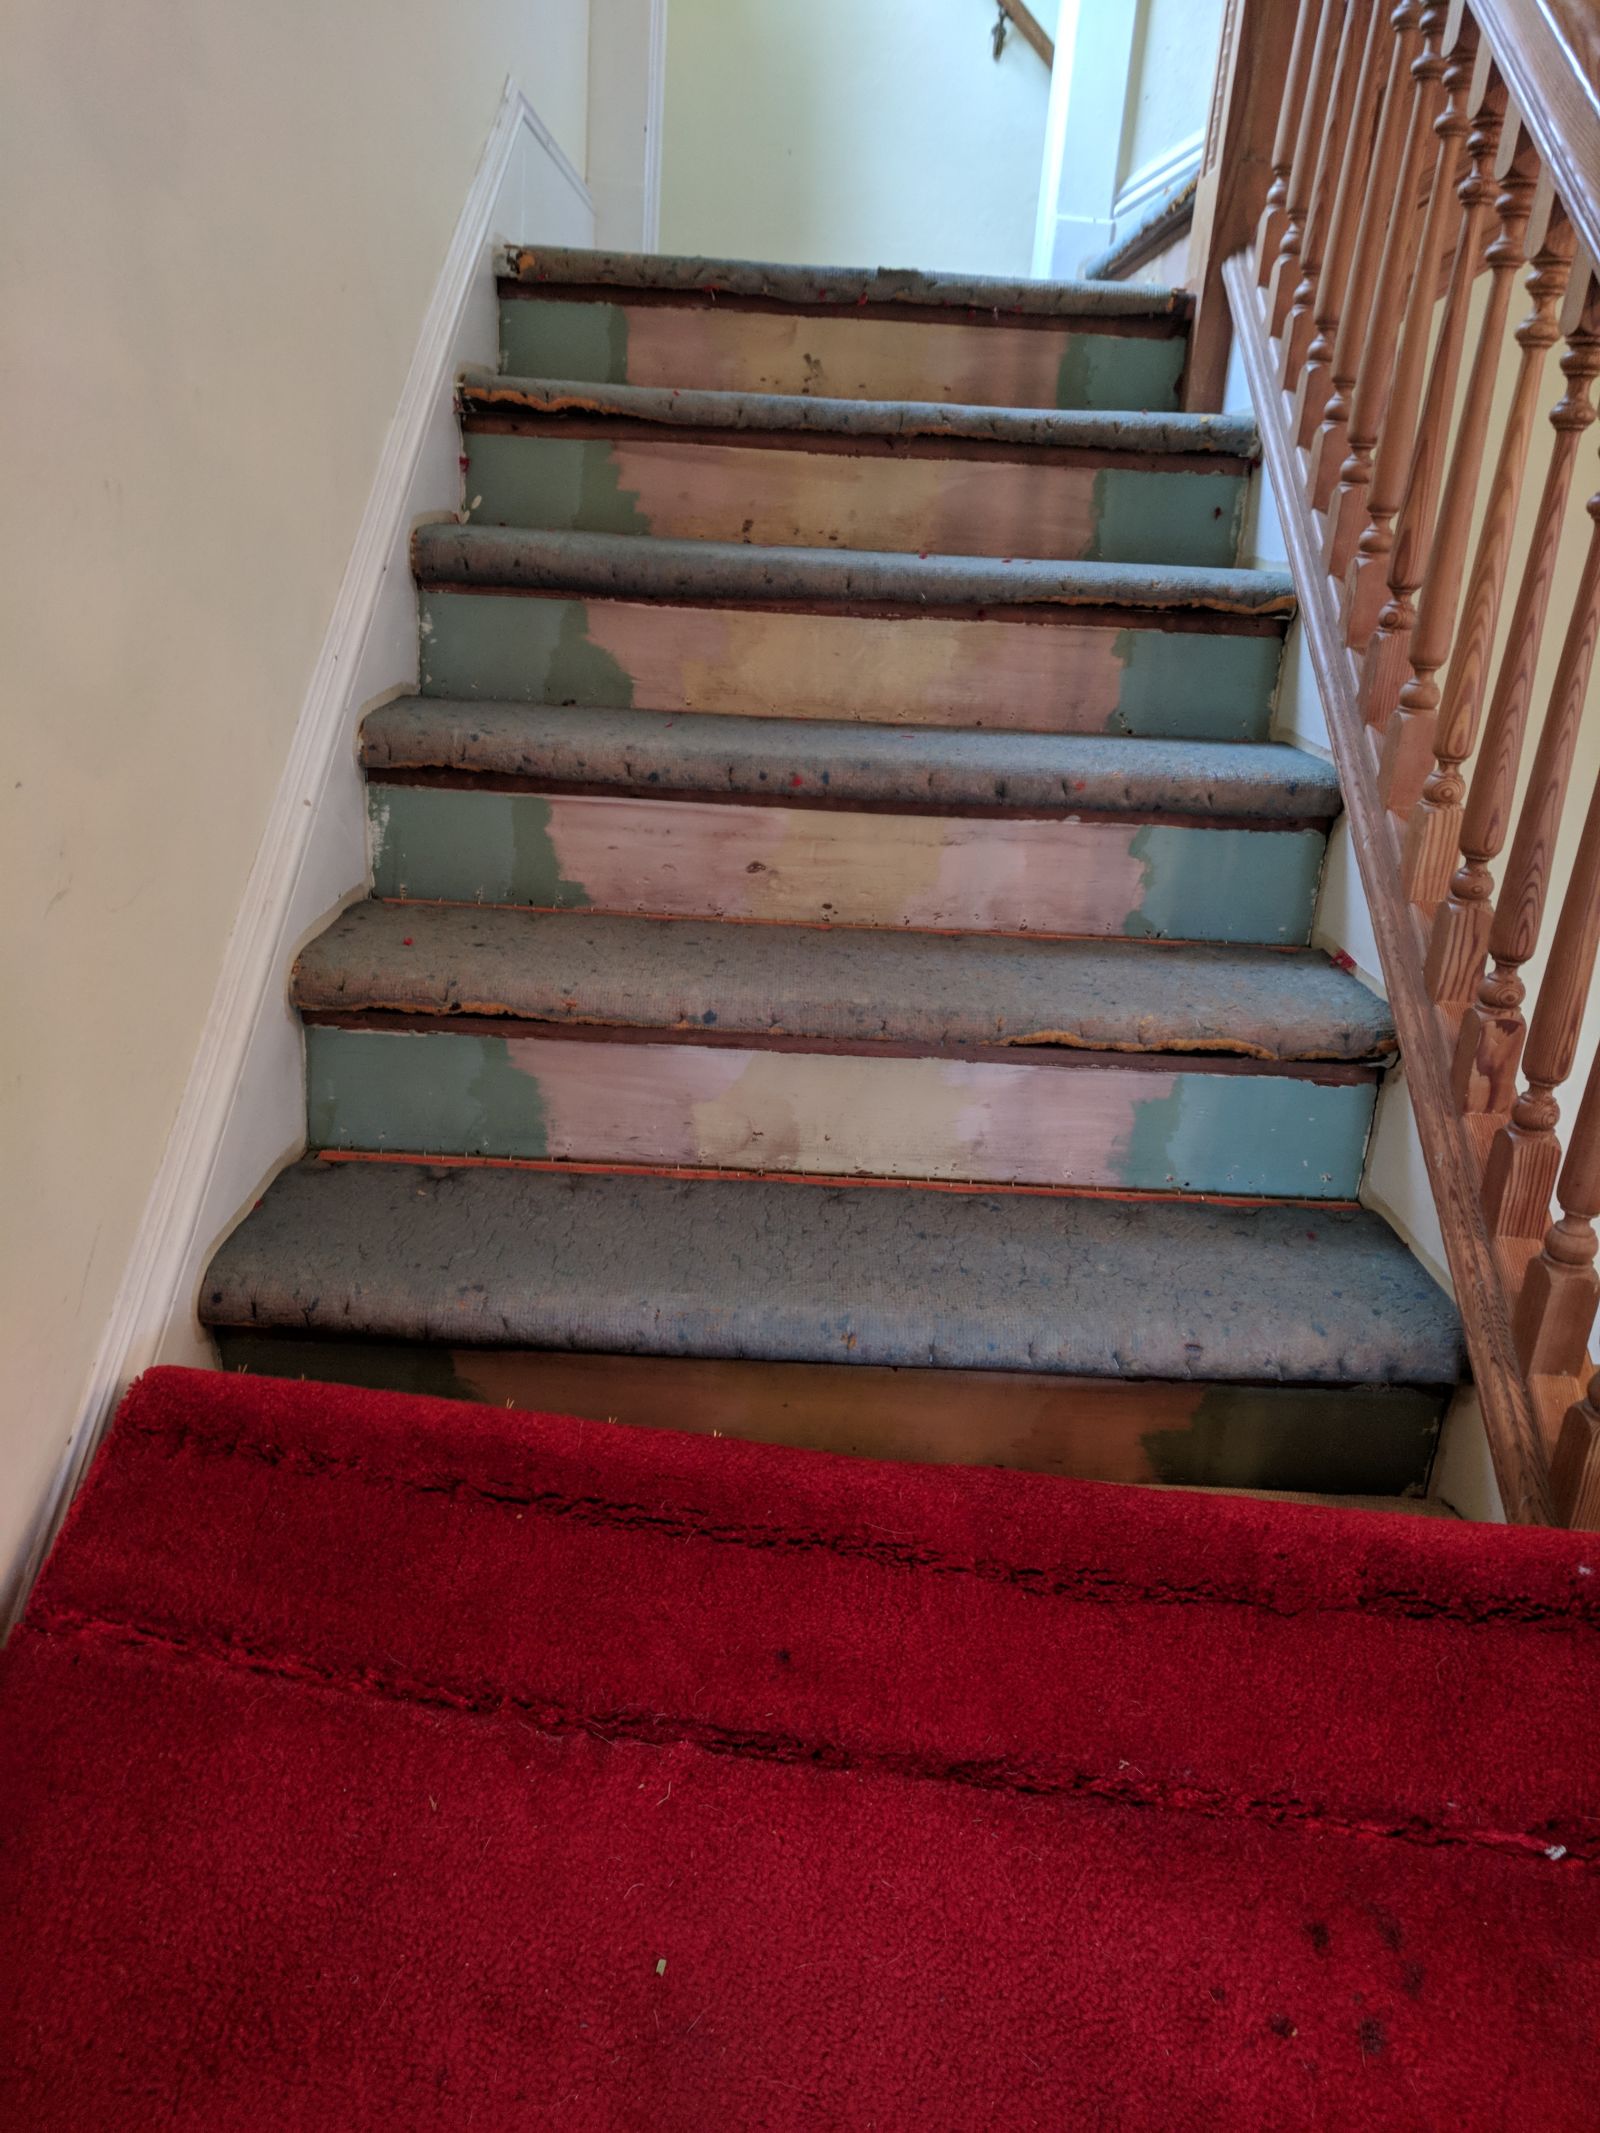 Stairs are a PITA to remove. Also, the colors children! The colors!